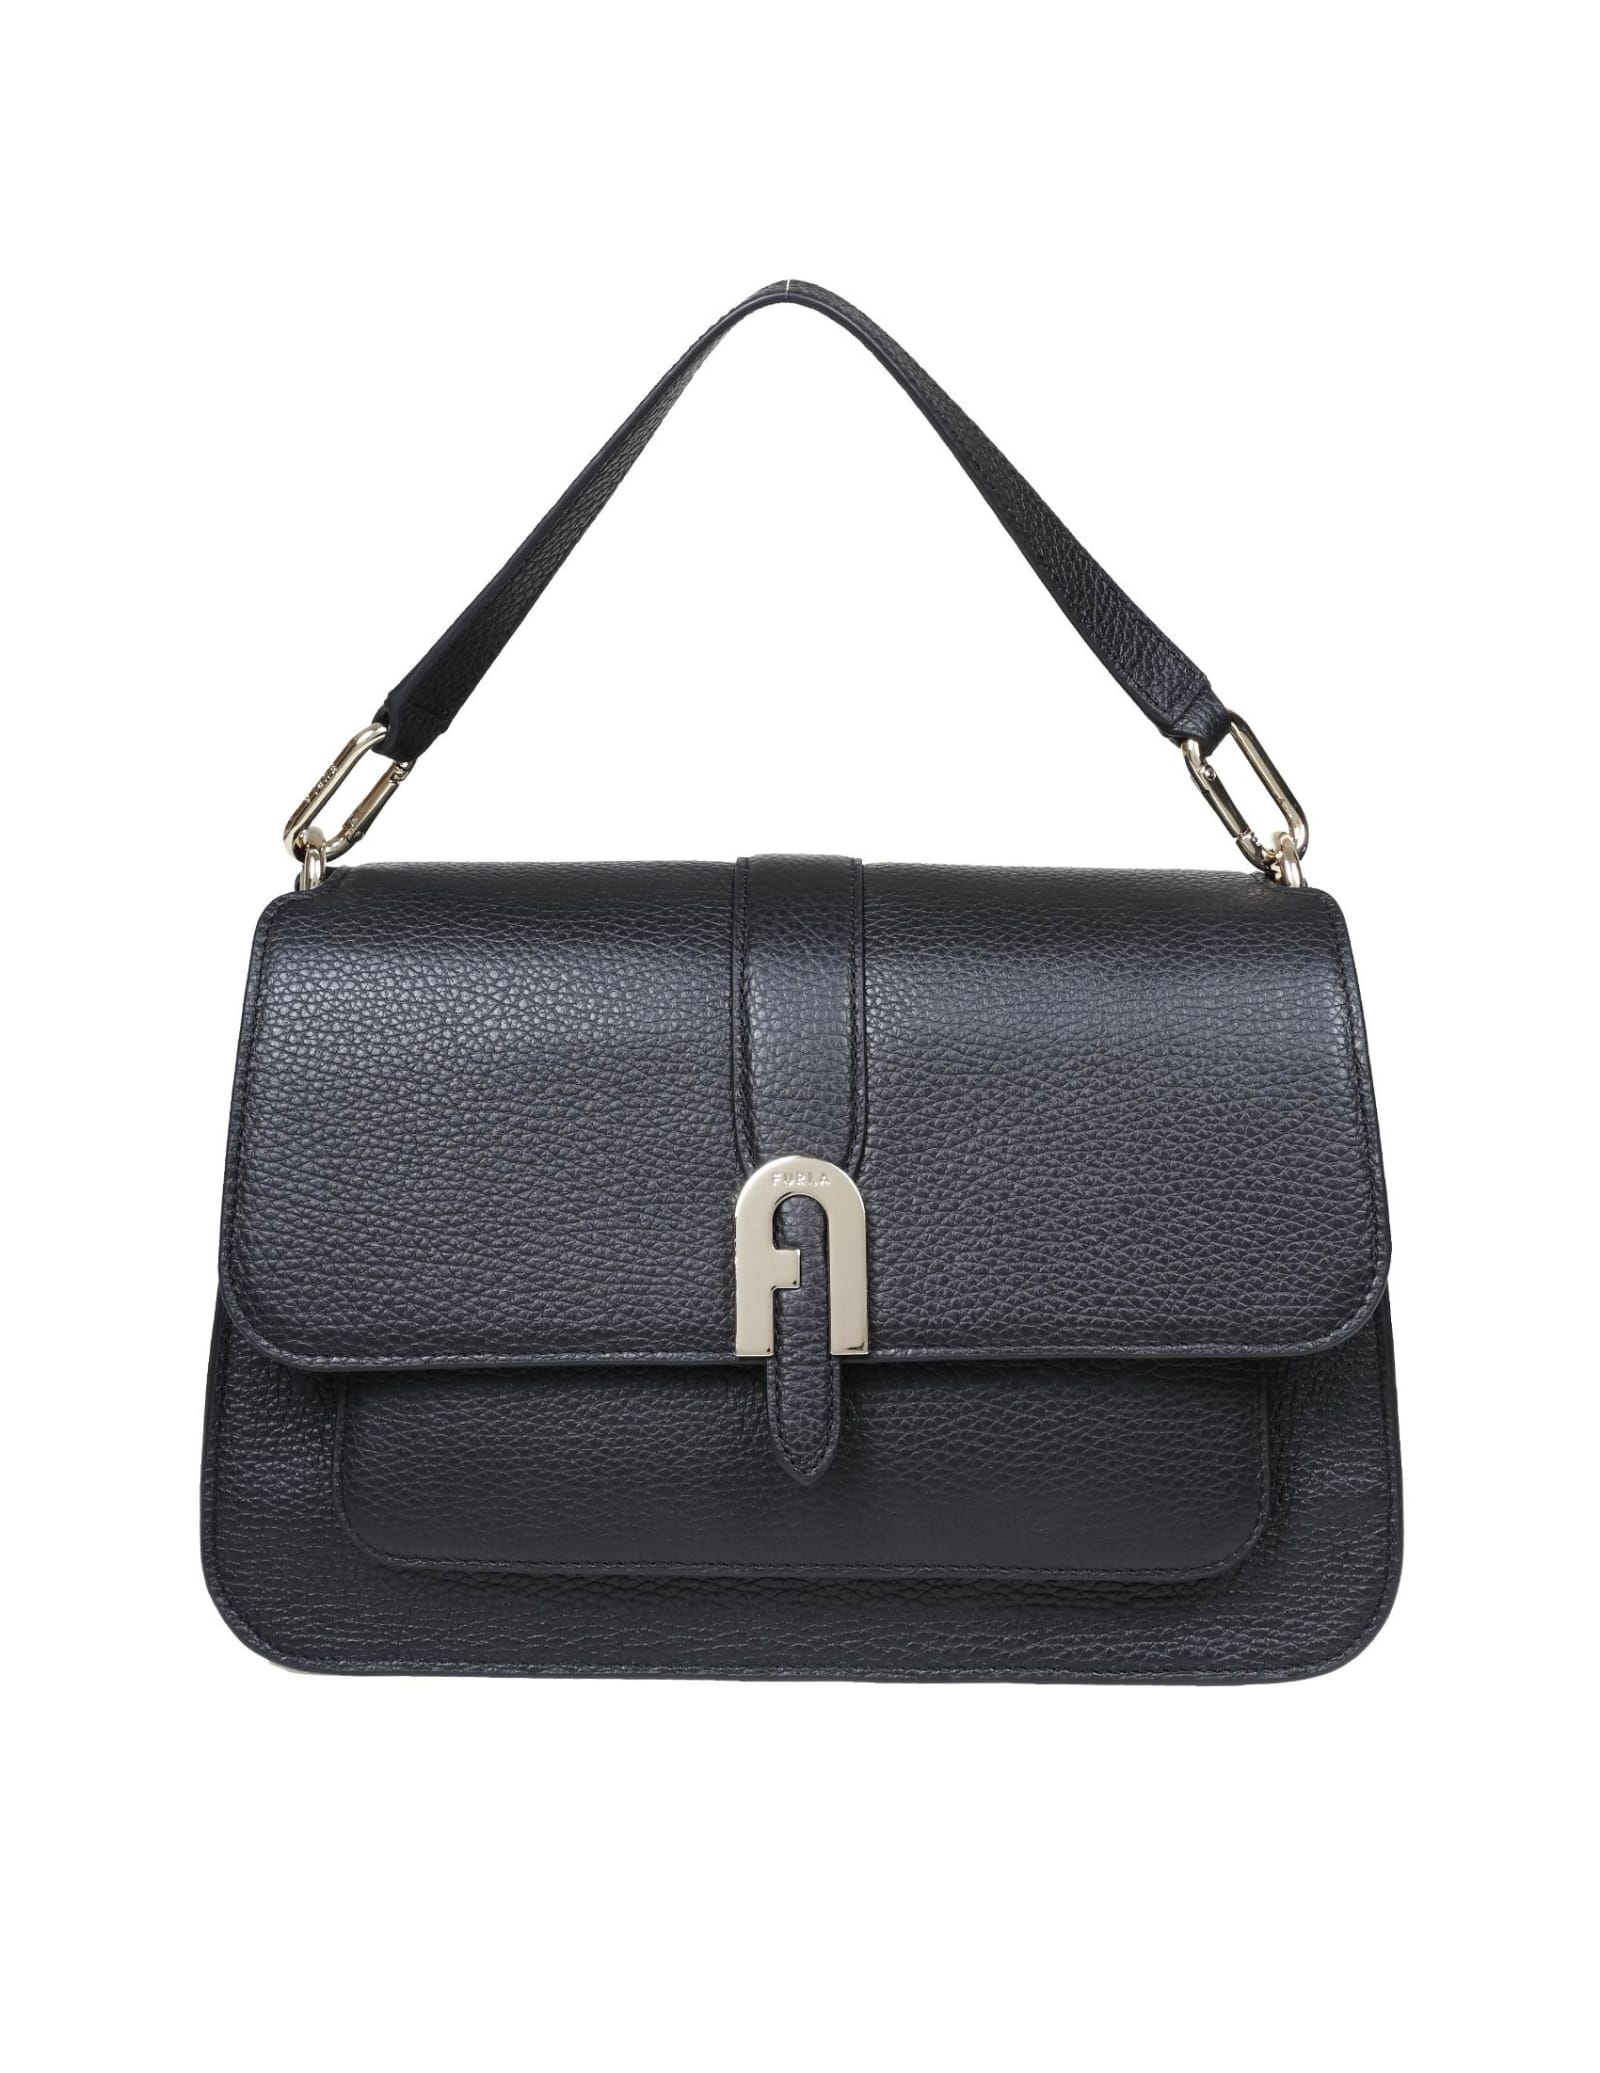 Furla Sofia Grainy M Bag In Leather And Black Color